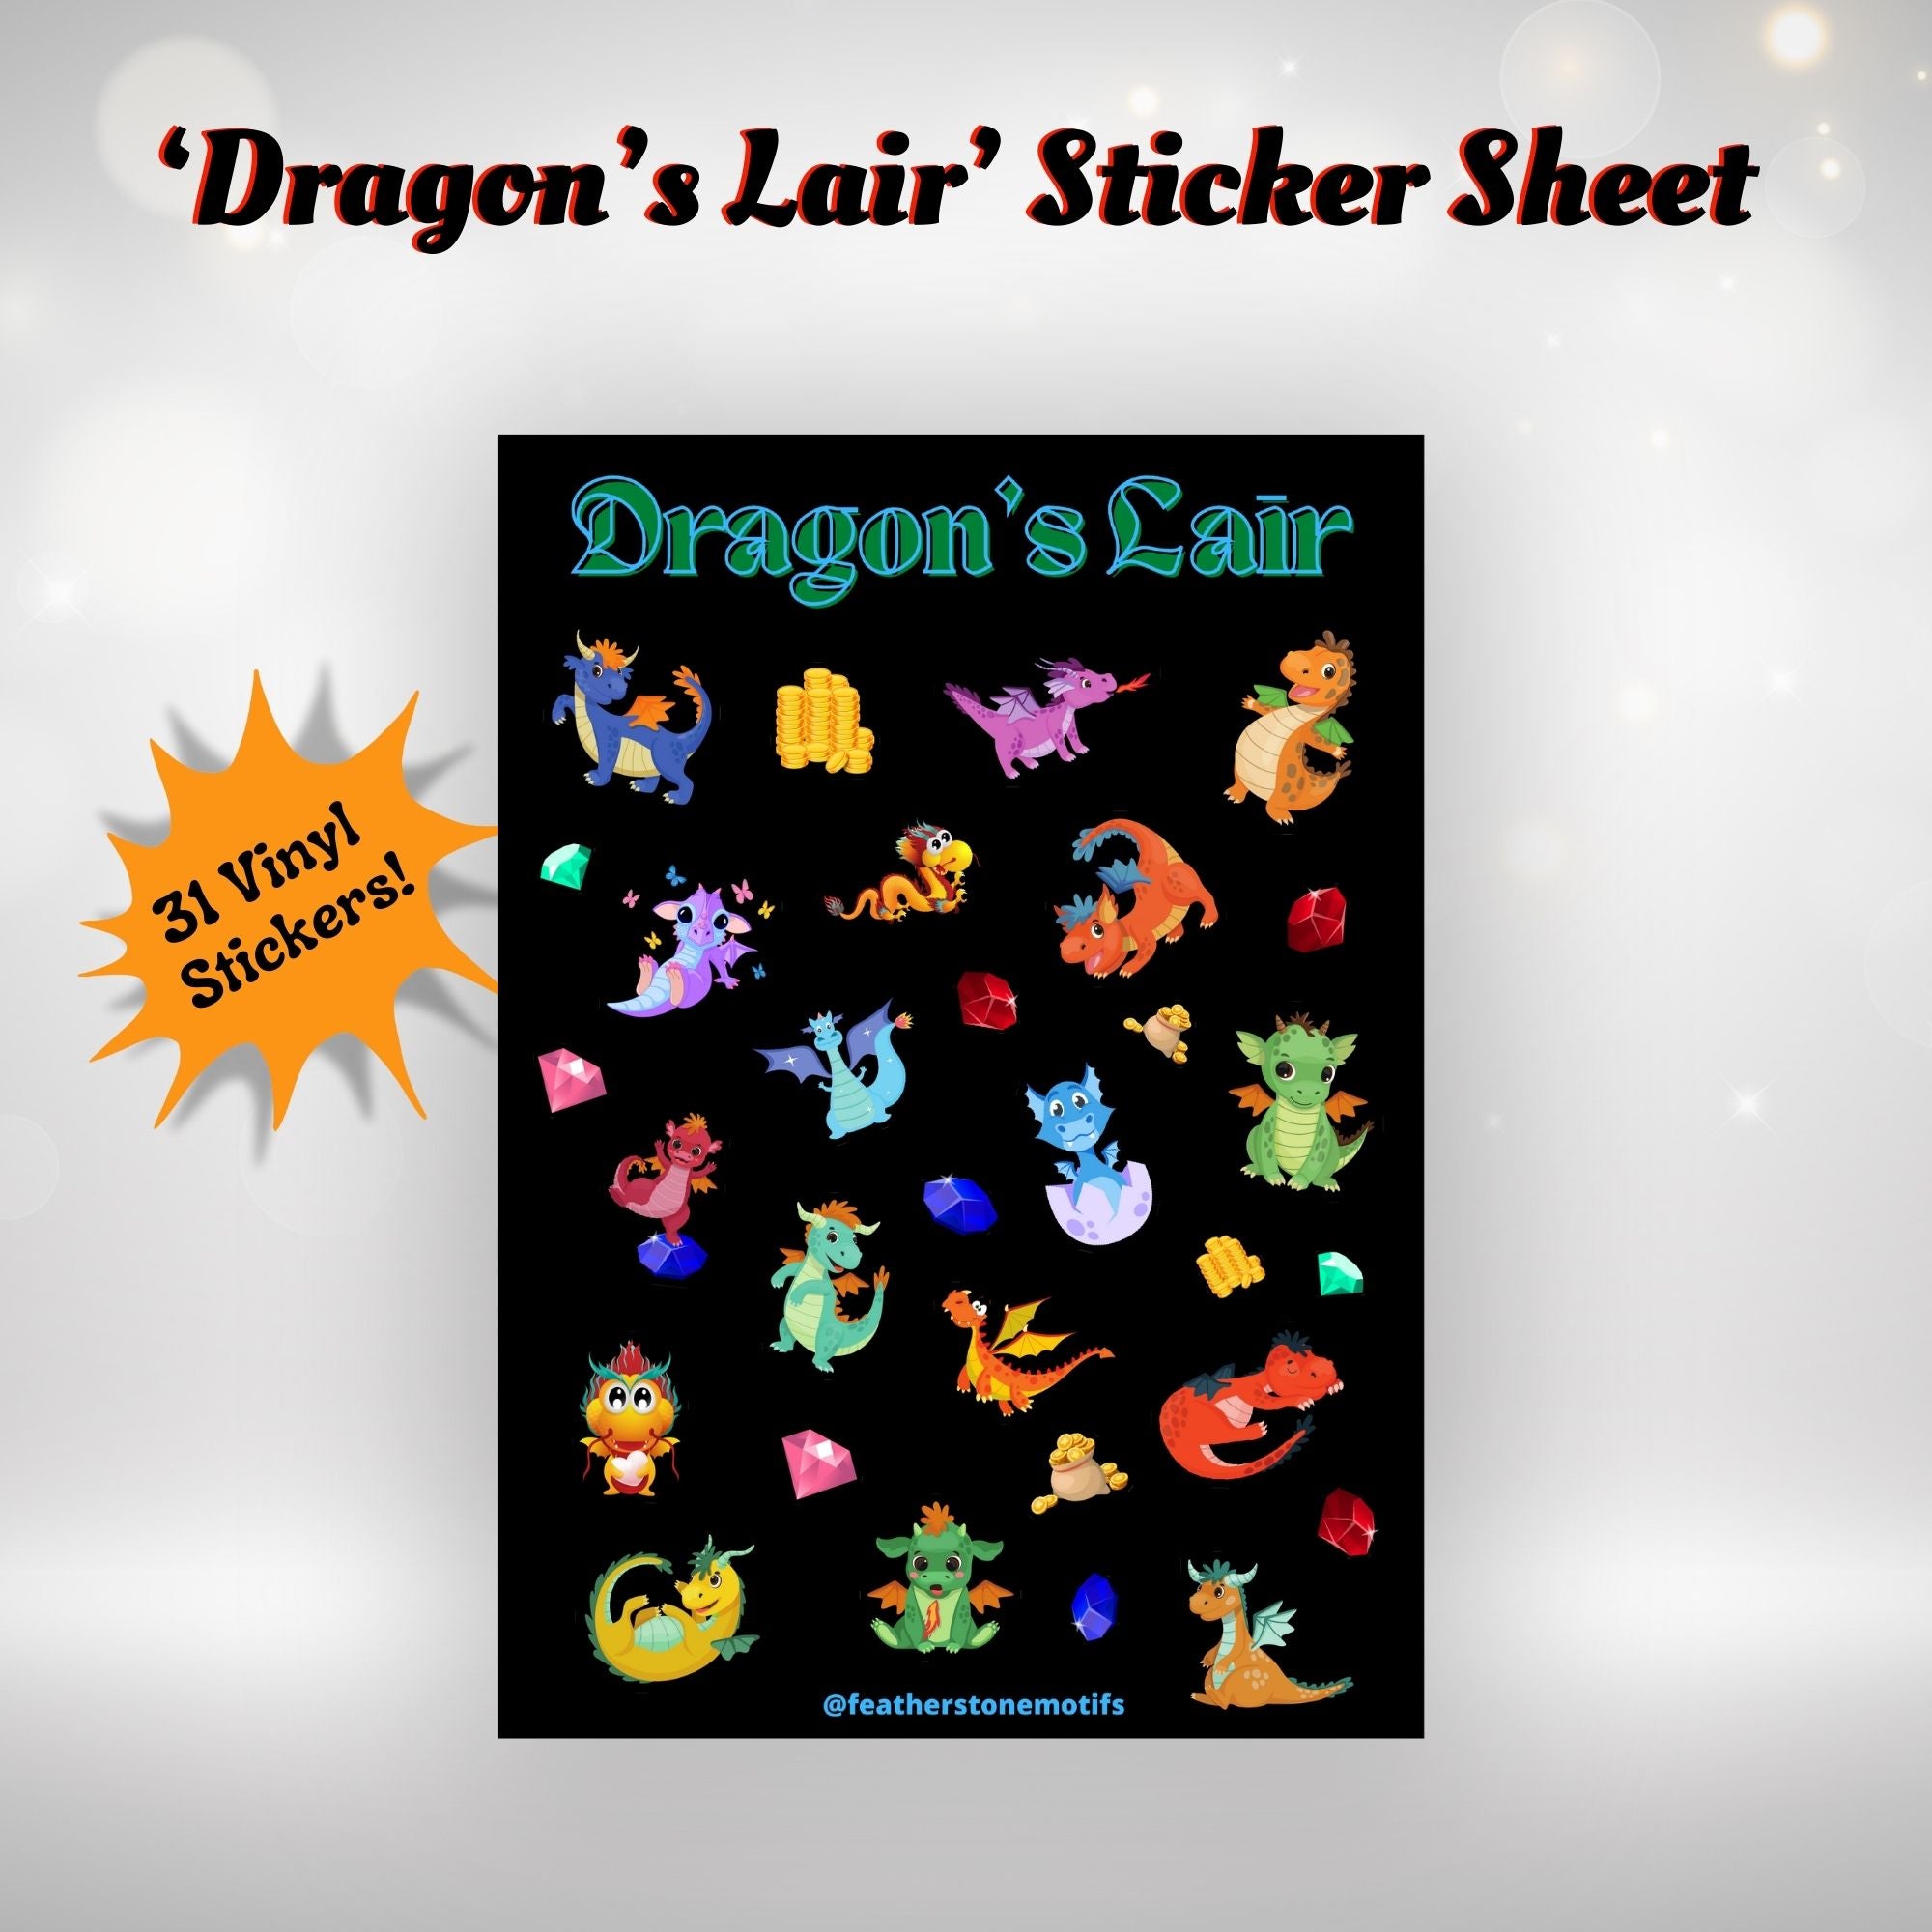 This image shows the Dragon's Lair sticker sheet with 31 vinyl stickers that is included in the Dragon's Lair themed Camp Postcard Kit.